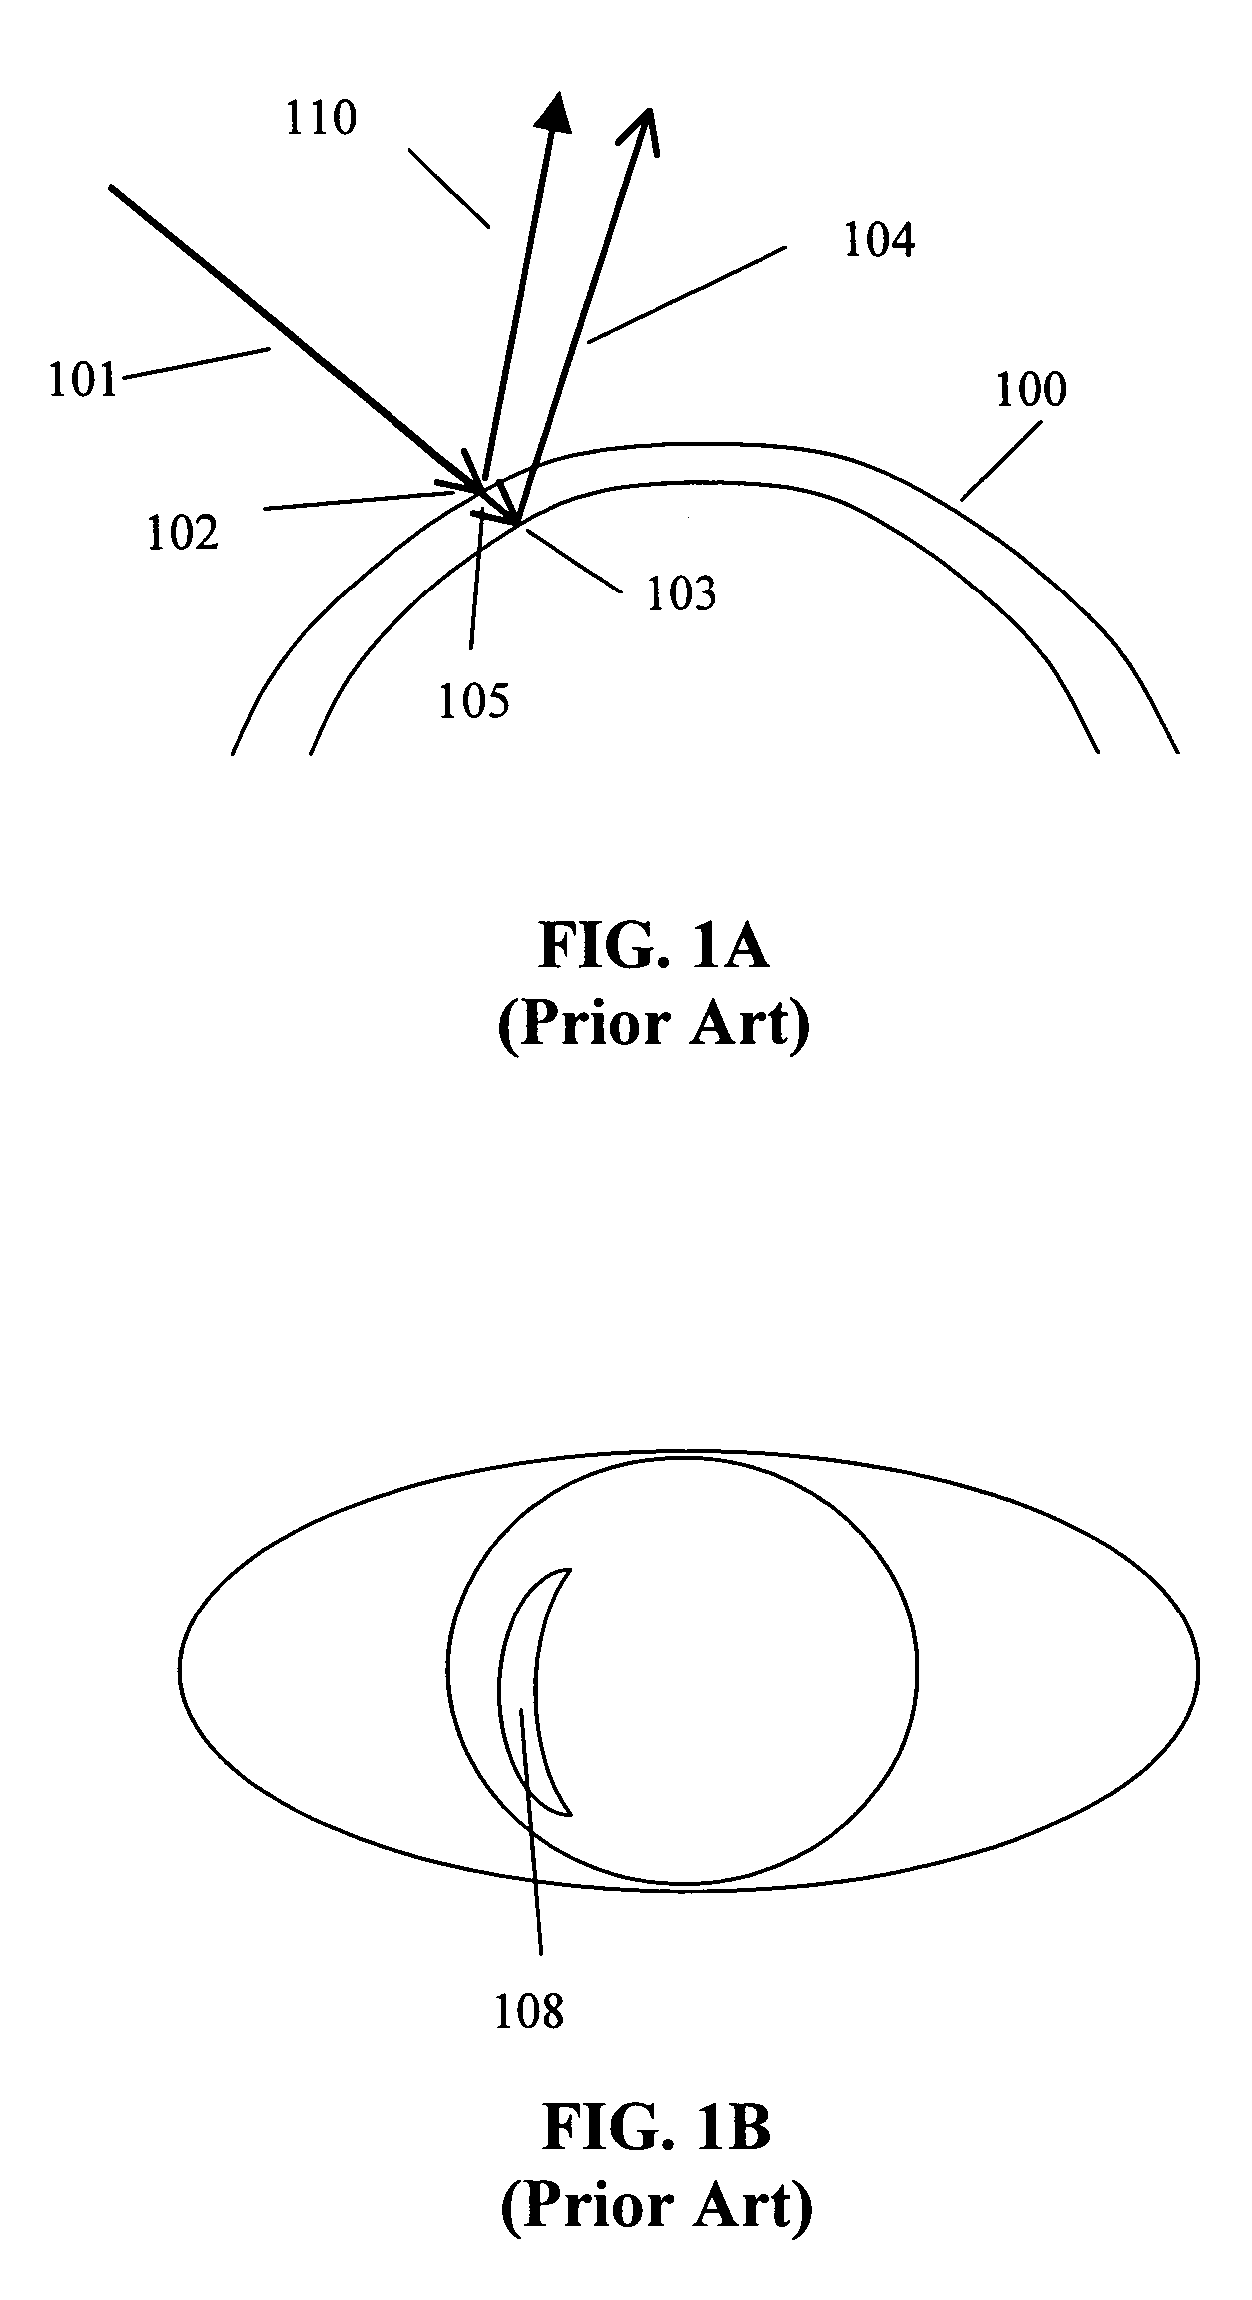 Optical apparatus and methods for performing eye examinations